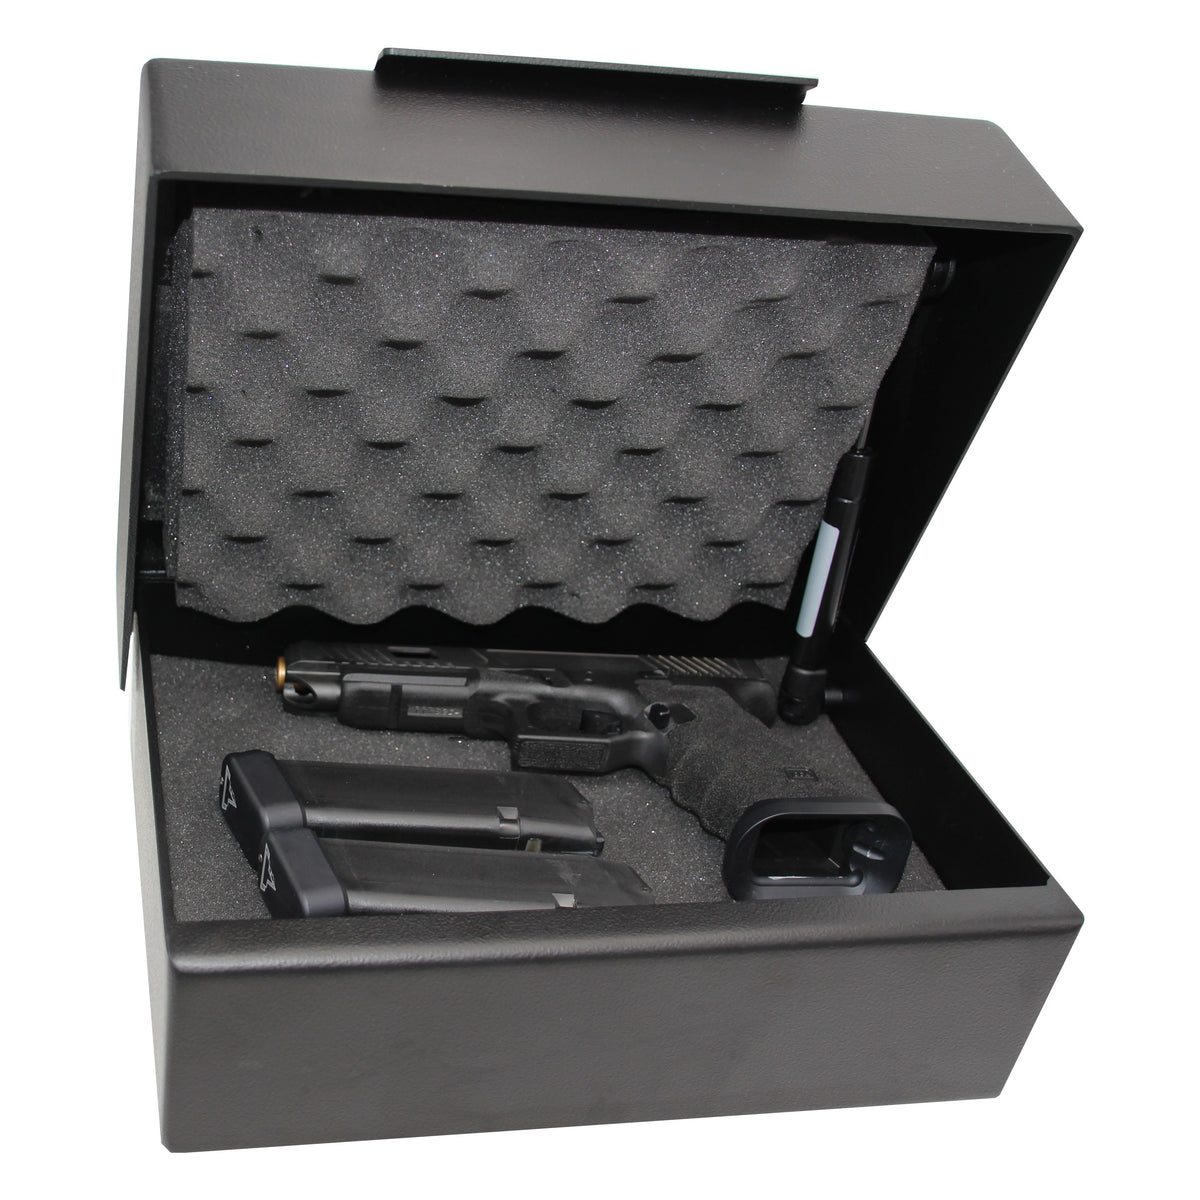 V-Line Brute XD Heavy Duty Large Pistol Safe with Heavy Duty Lock Cover 1394-S-FBLK XD